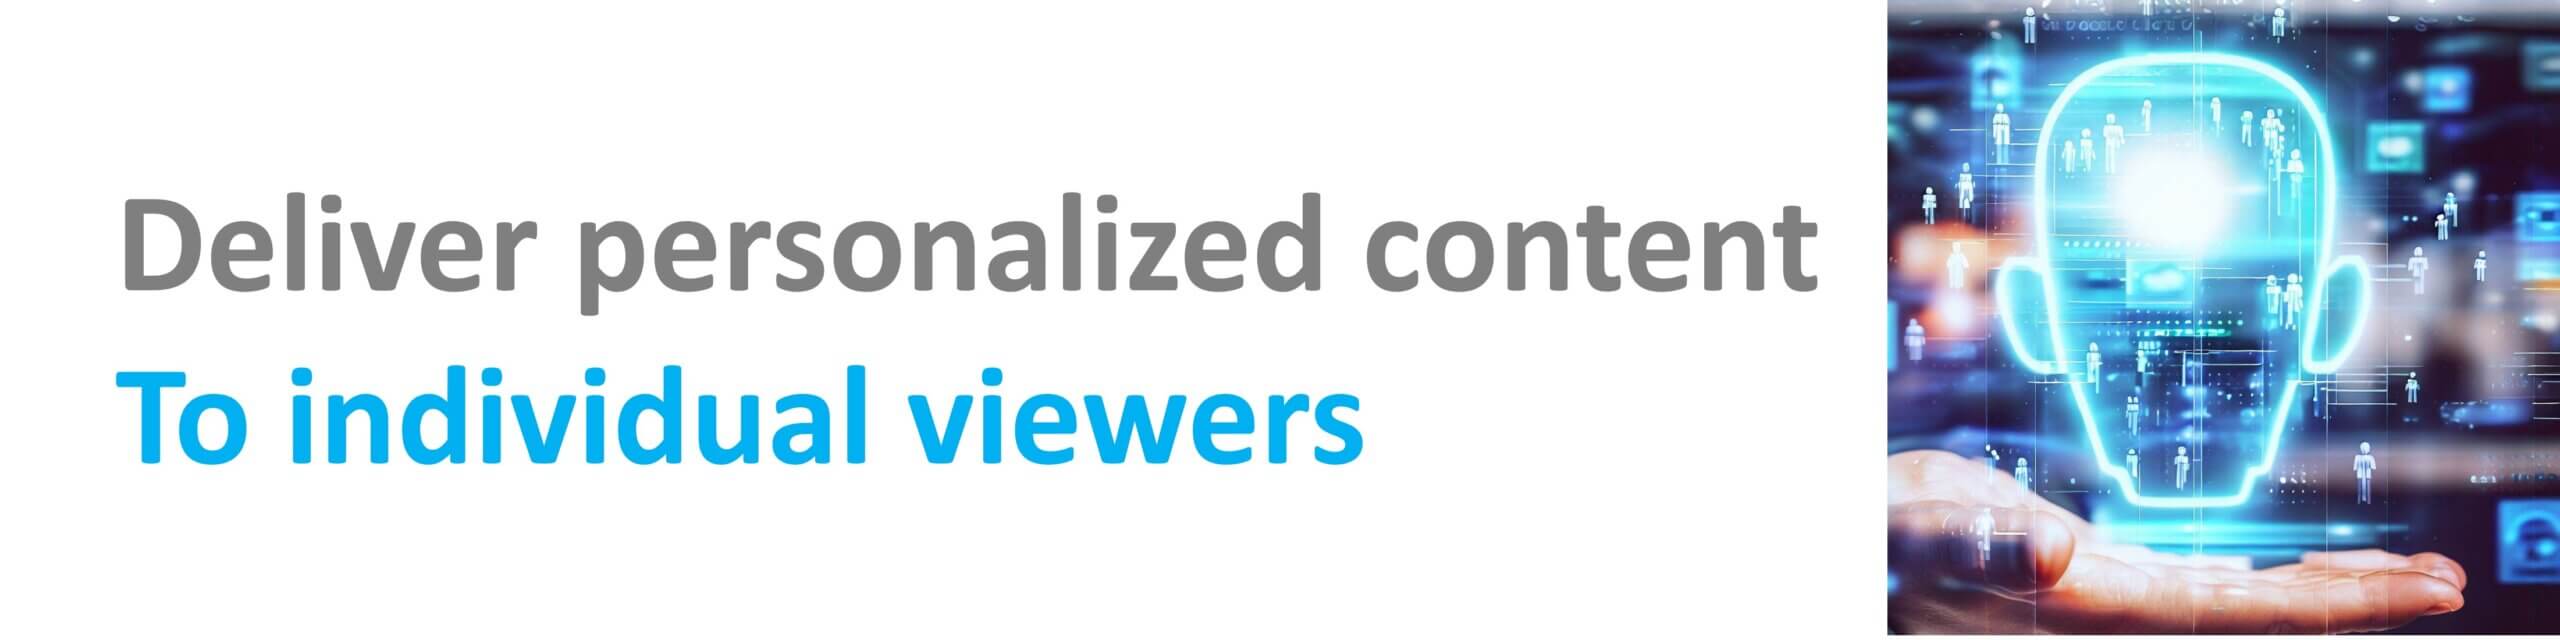 personalized content to individual viewers based on their preferences, demographics, and historical data